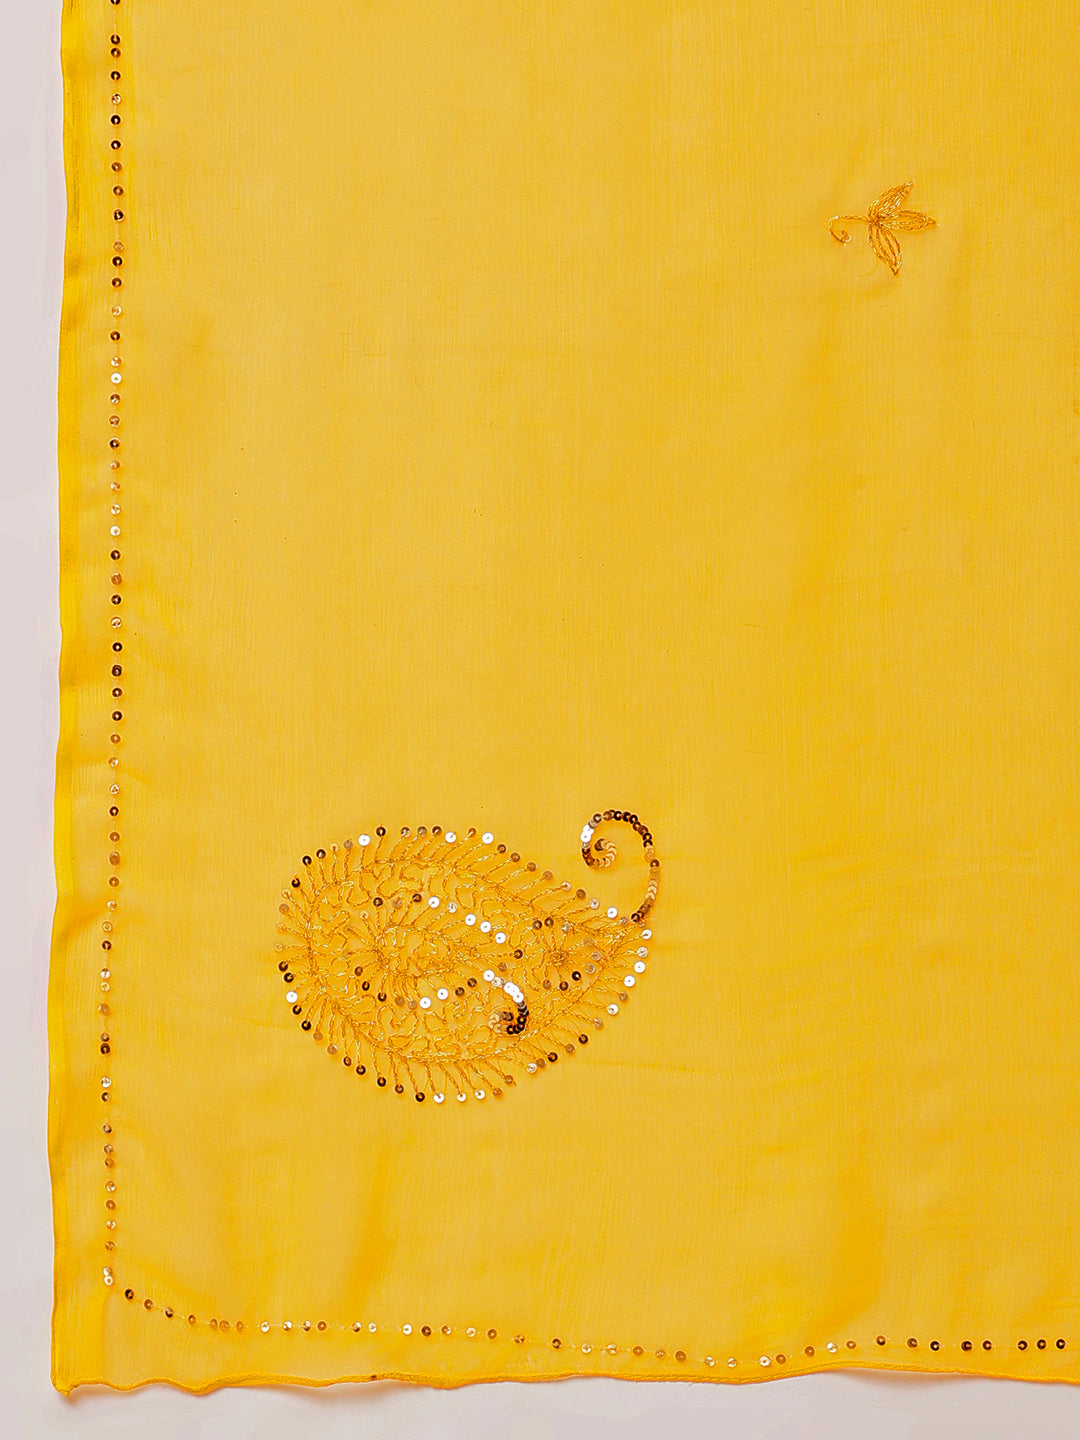 Buttercup Voile (Hand Embroidered Festive Chiffon Saree)